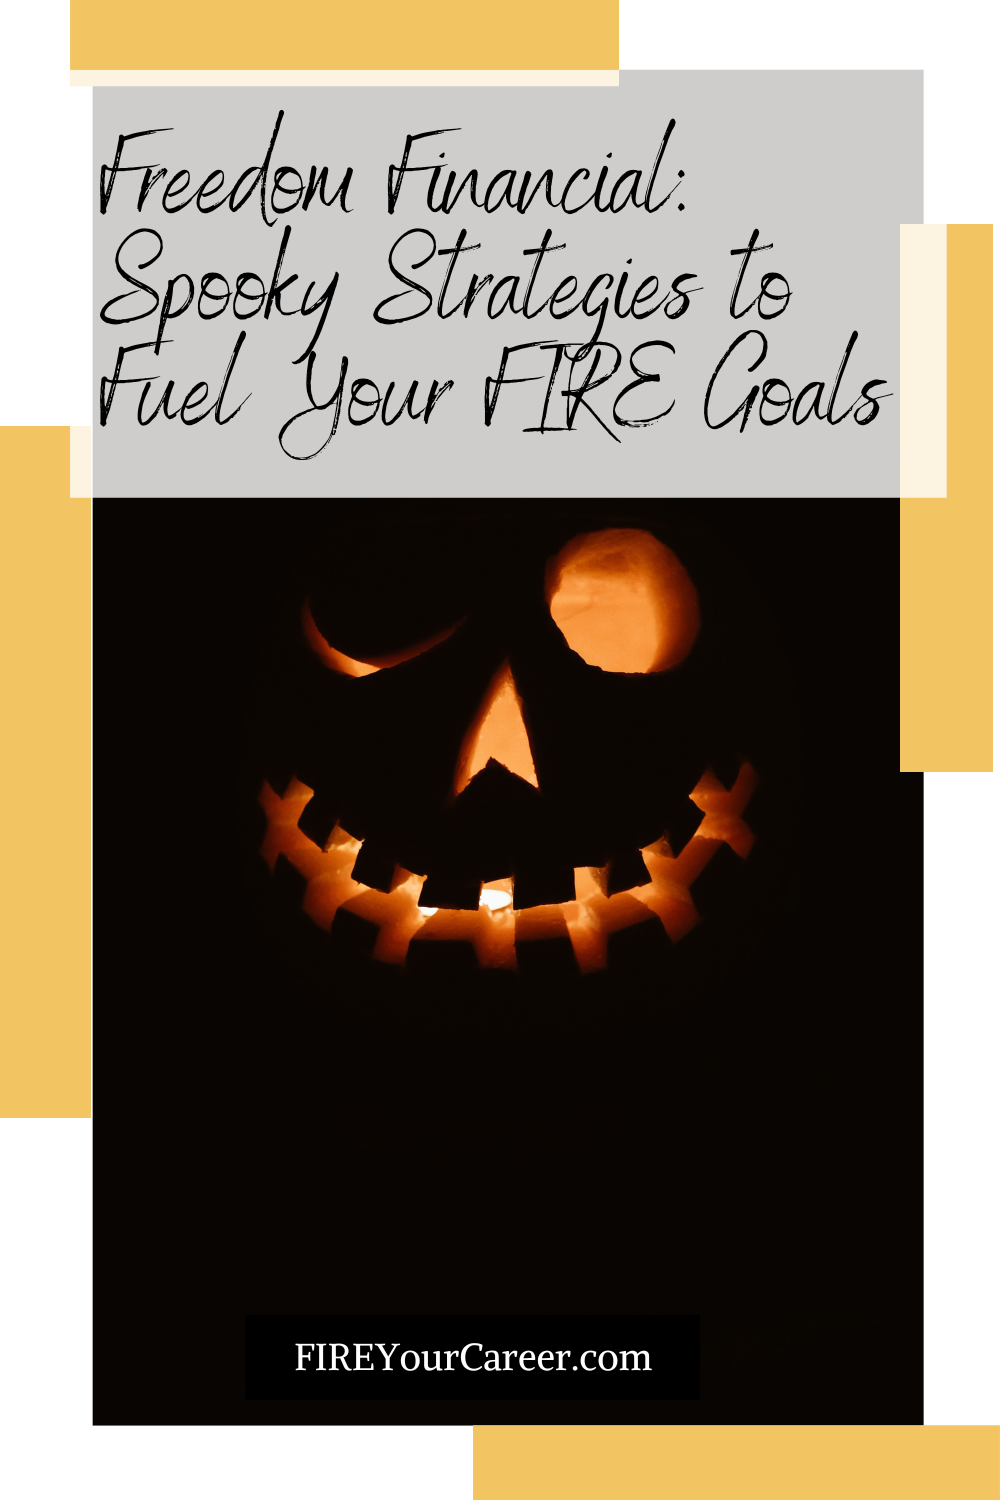 Freedom Financial Spooky Strategies to Fuel Your FIRE Goals Pinterest